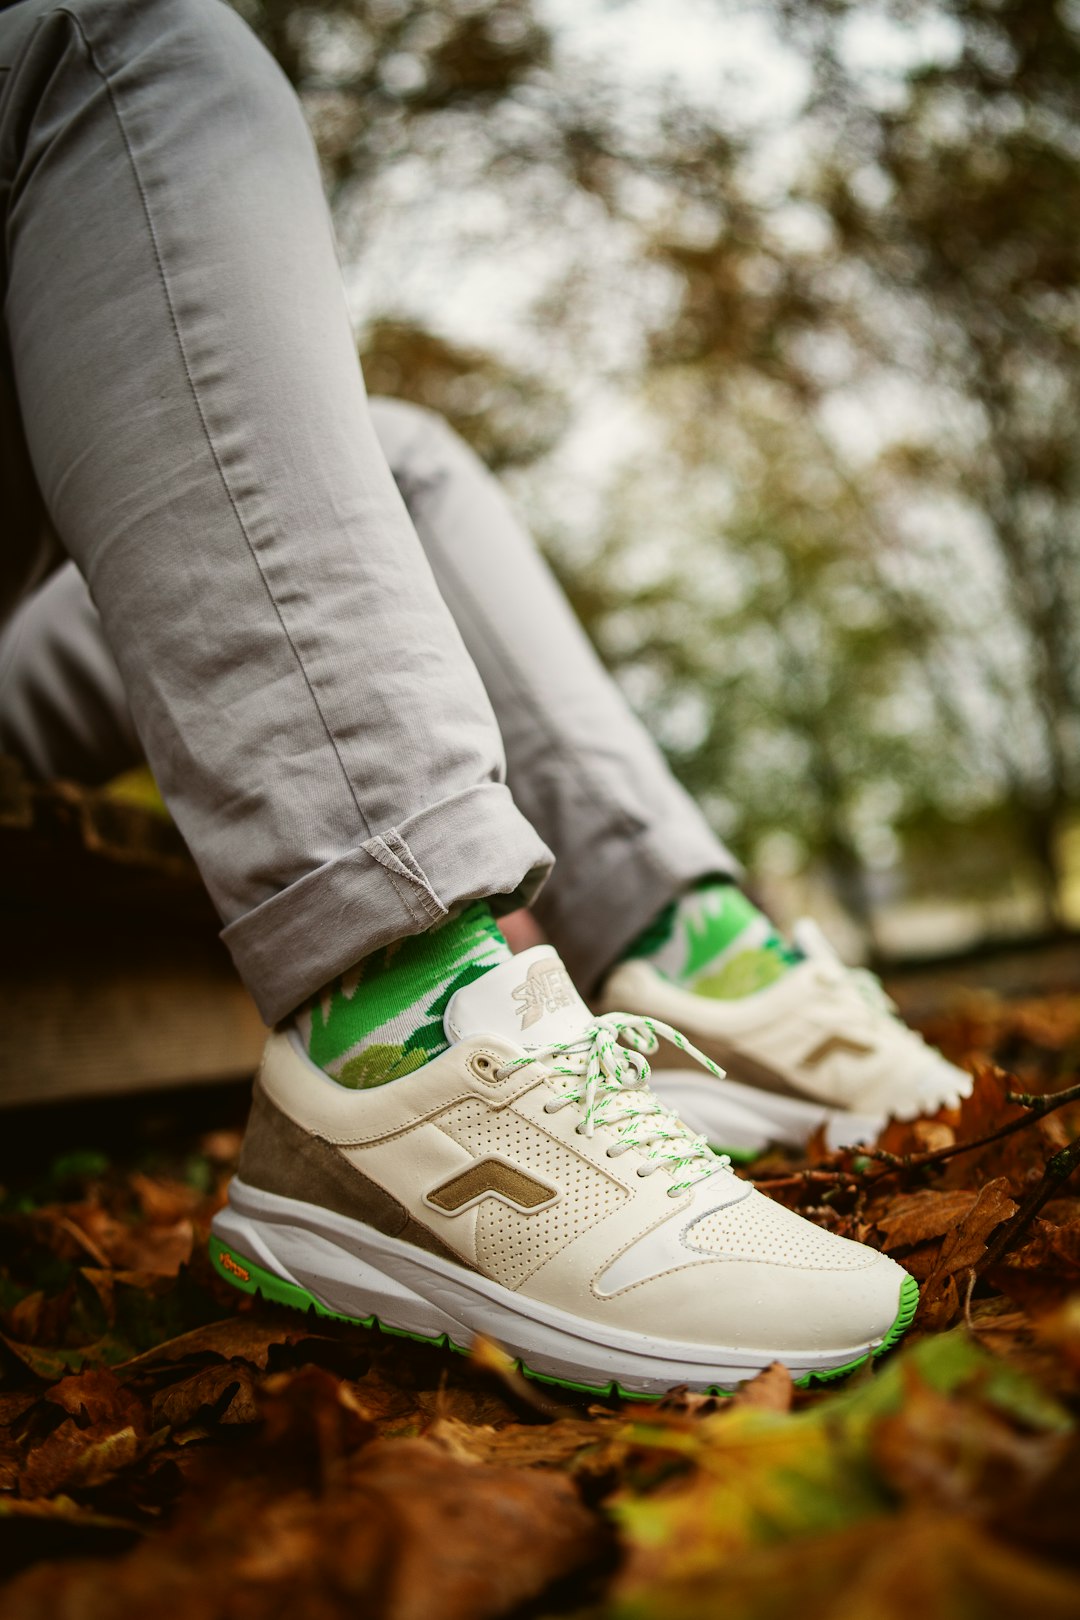 person wearing green and white nike athletic shoes